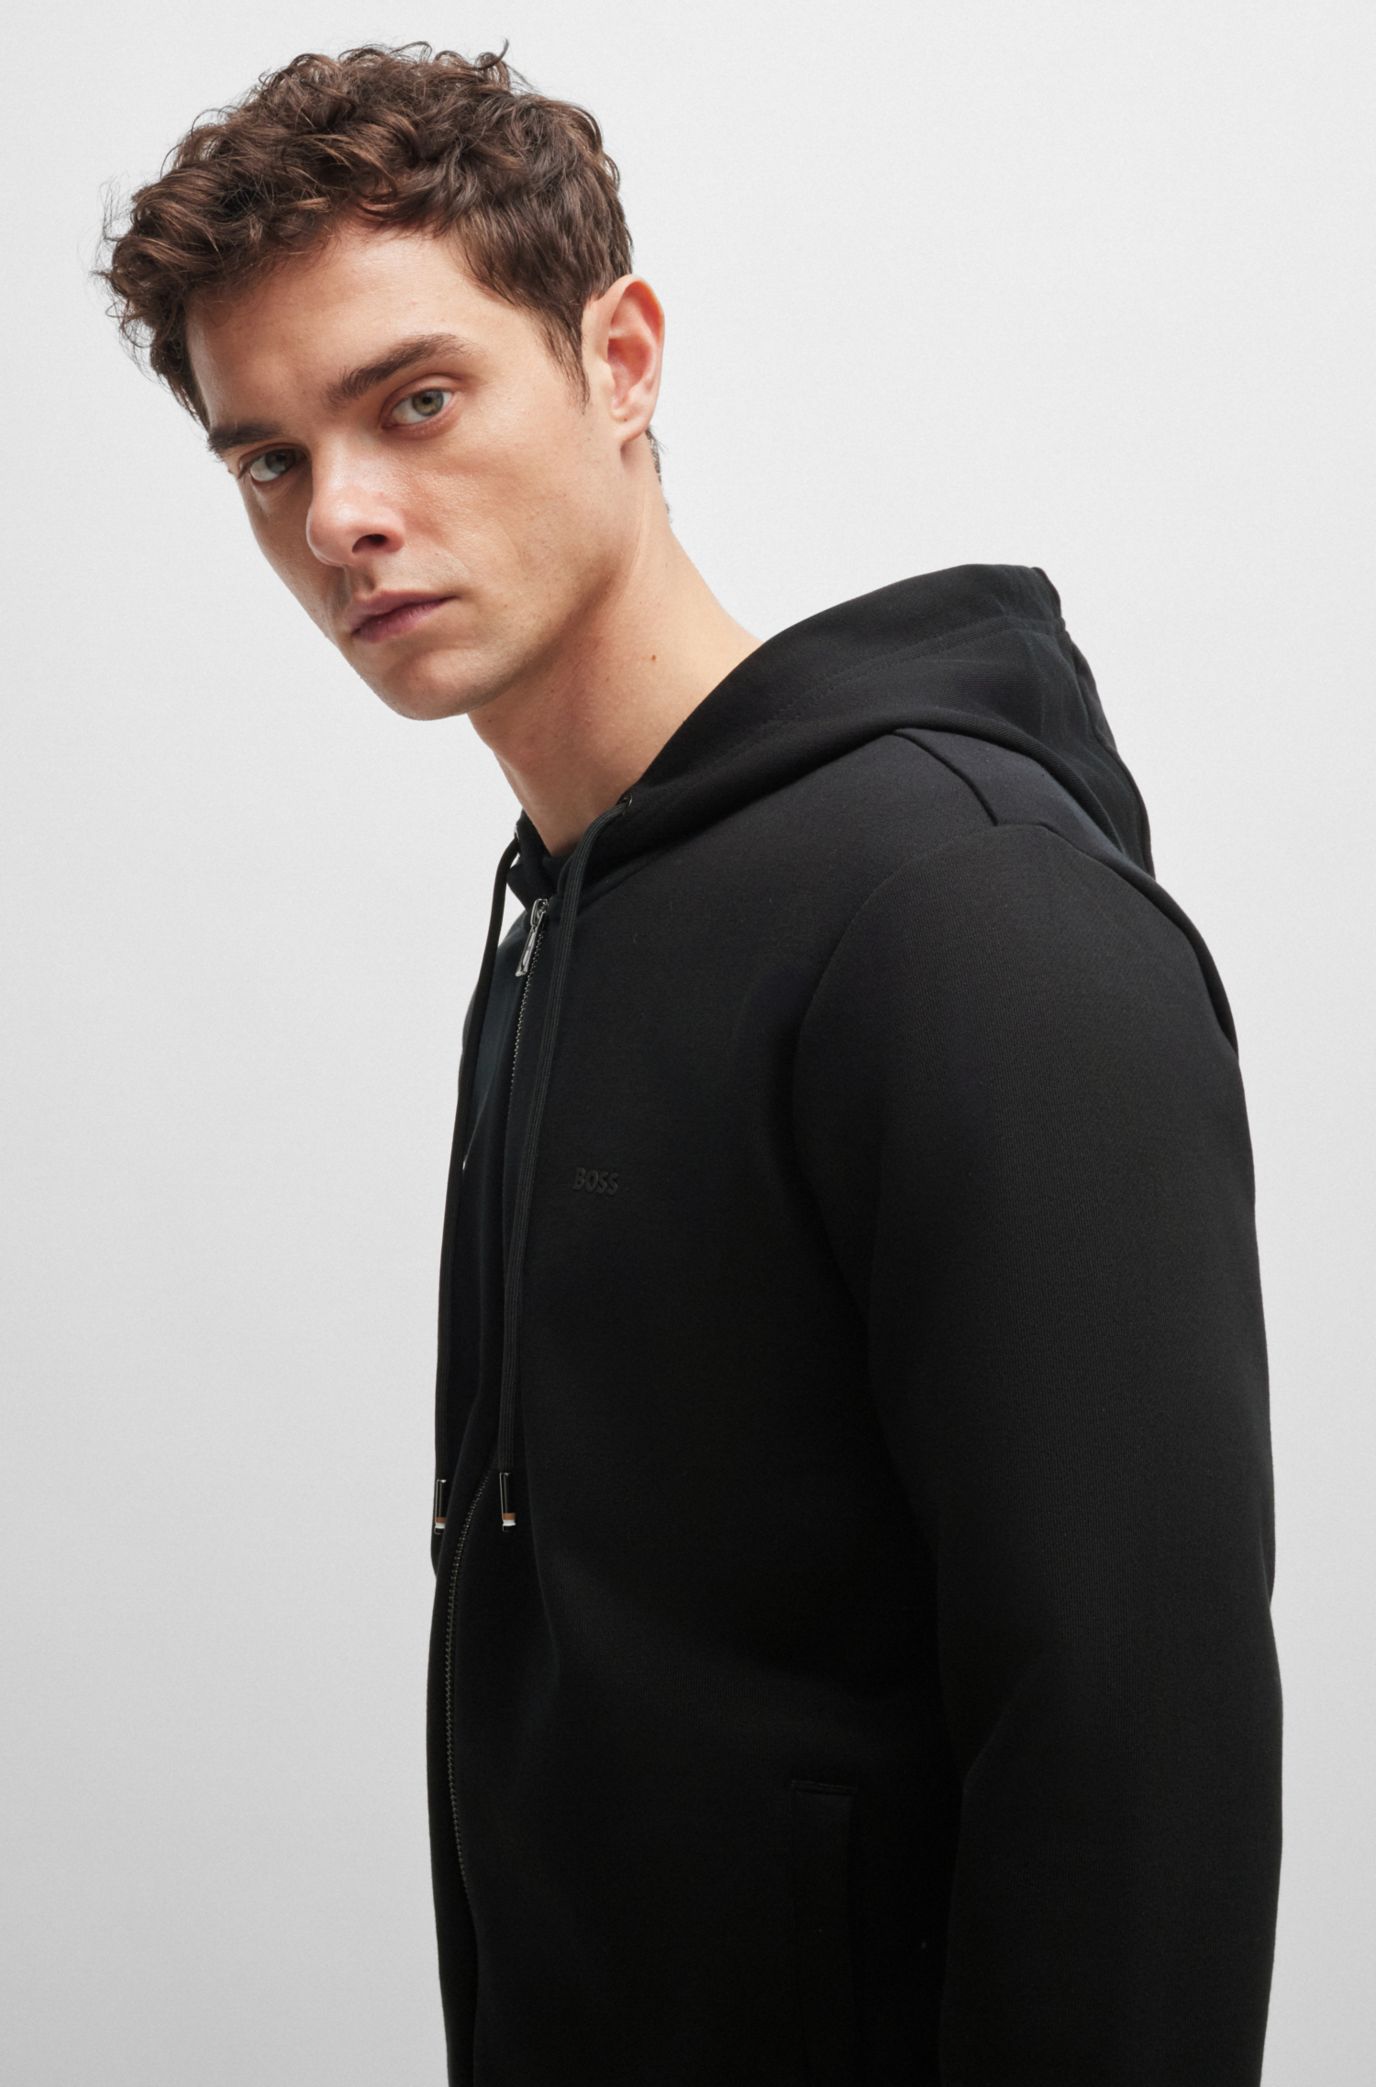 BOSS - Zip-up hoodie in French terry with printed logo